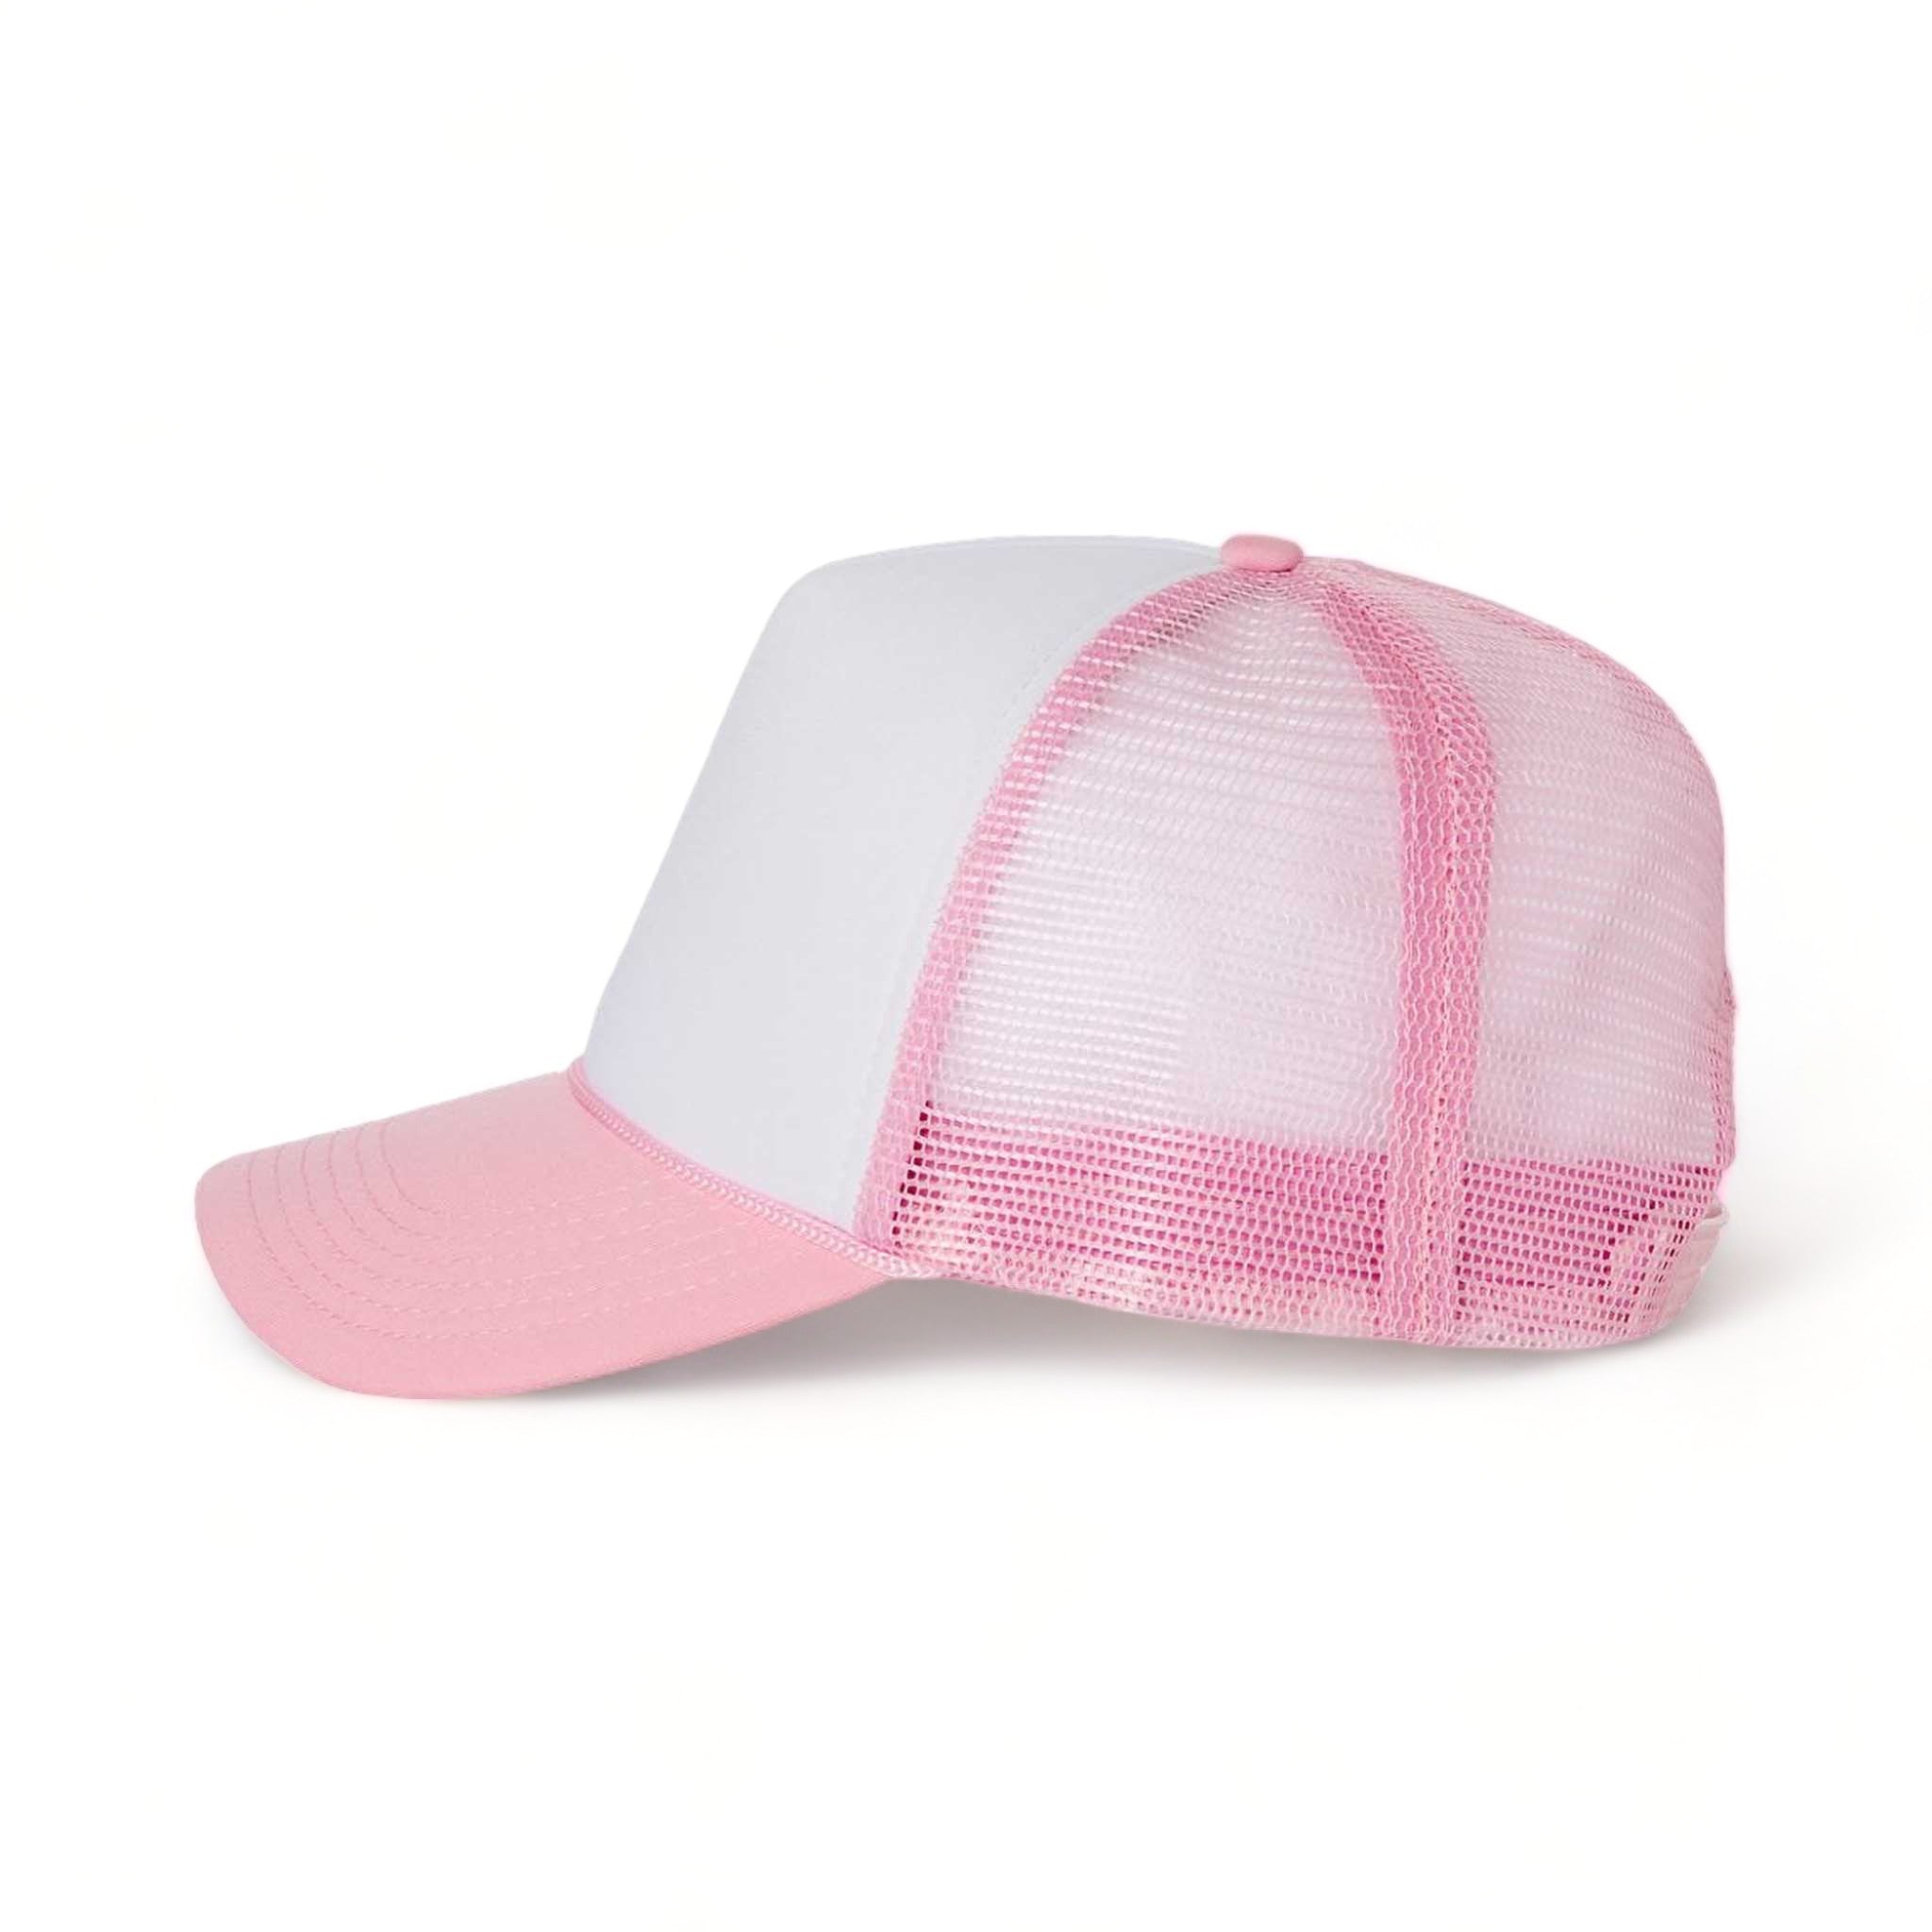 Side view of Valucap VC700 custom hat in white and pink